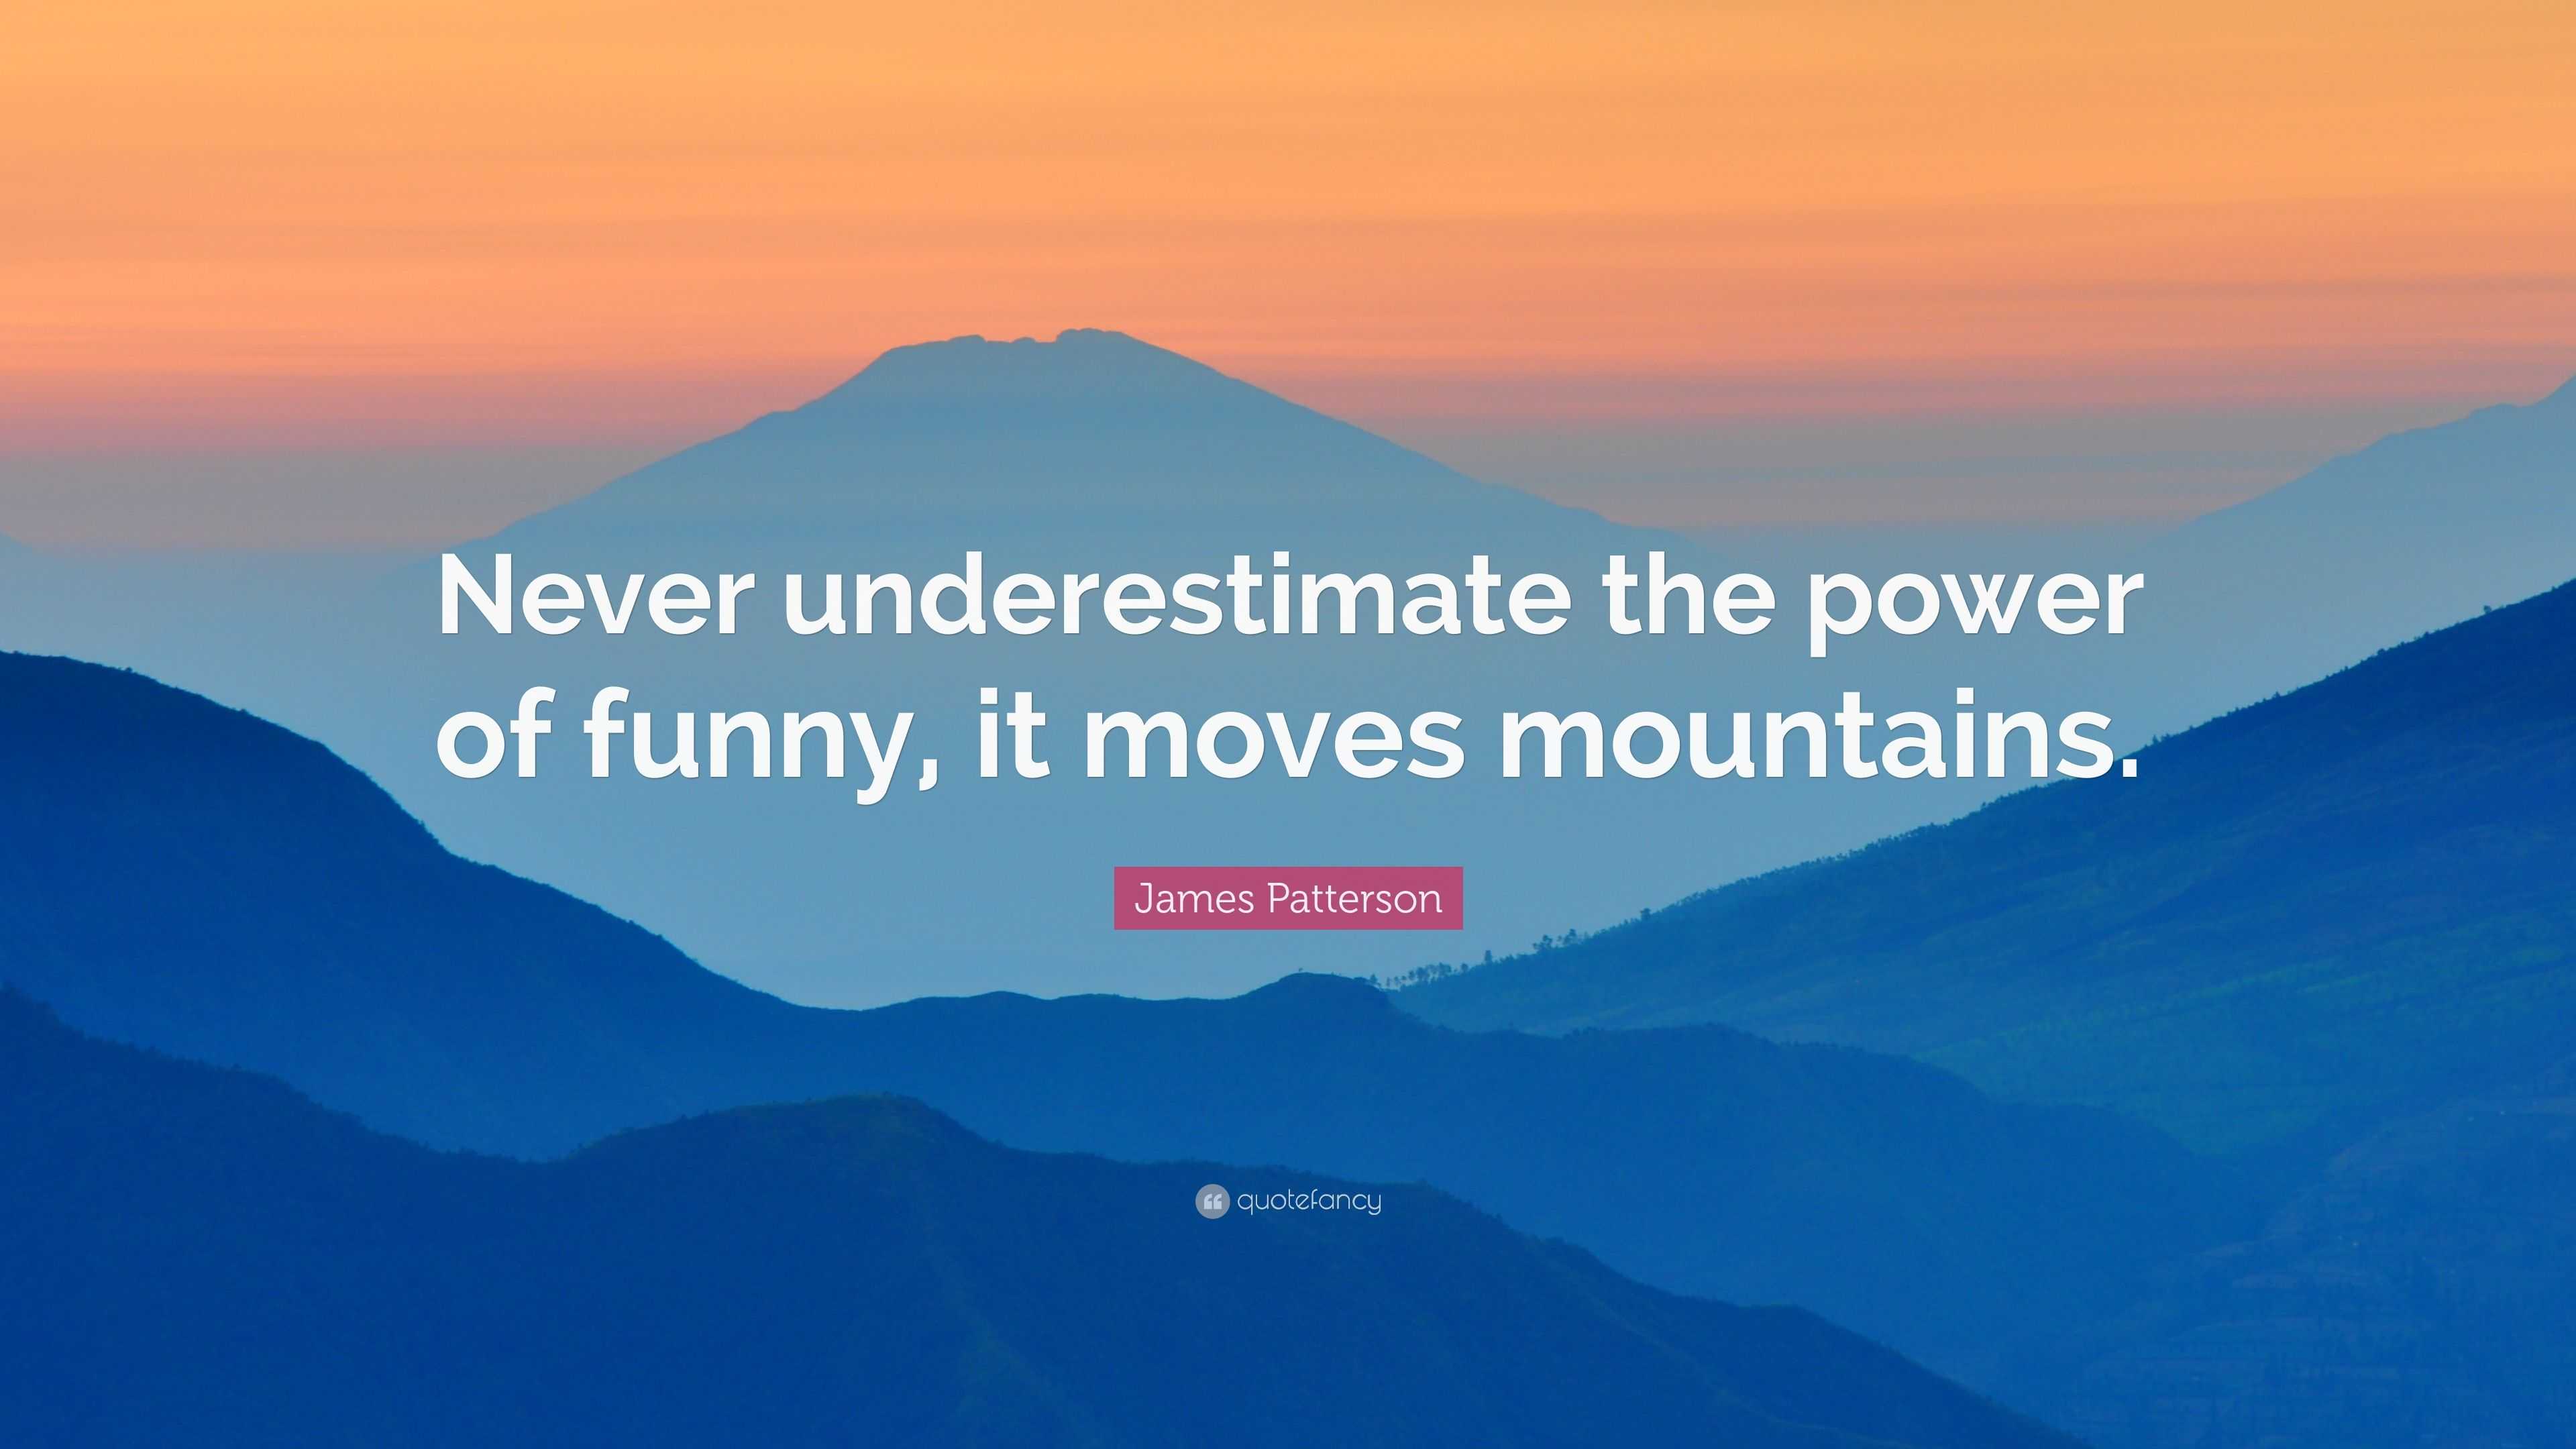 James Patterson Quote: “Never underestimate the power of funny, it moves  mountains.”